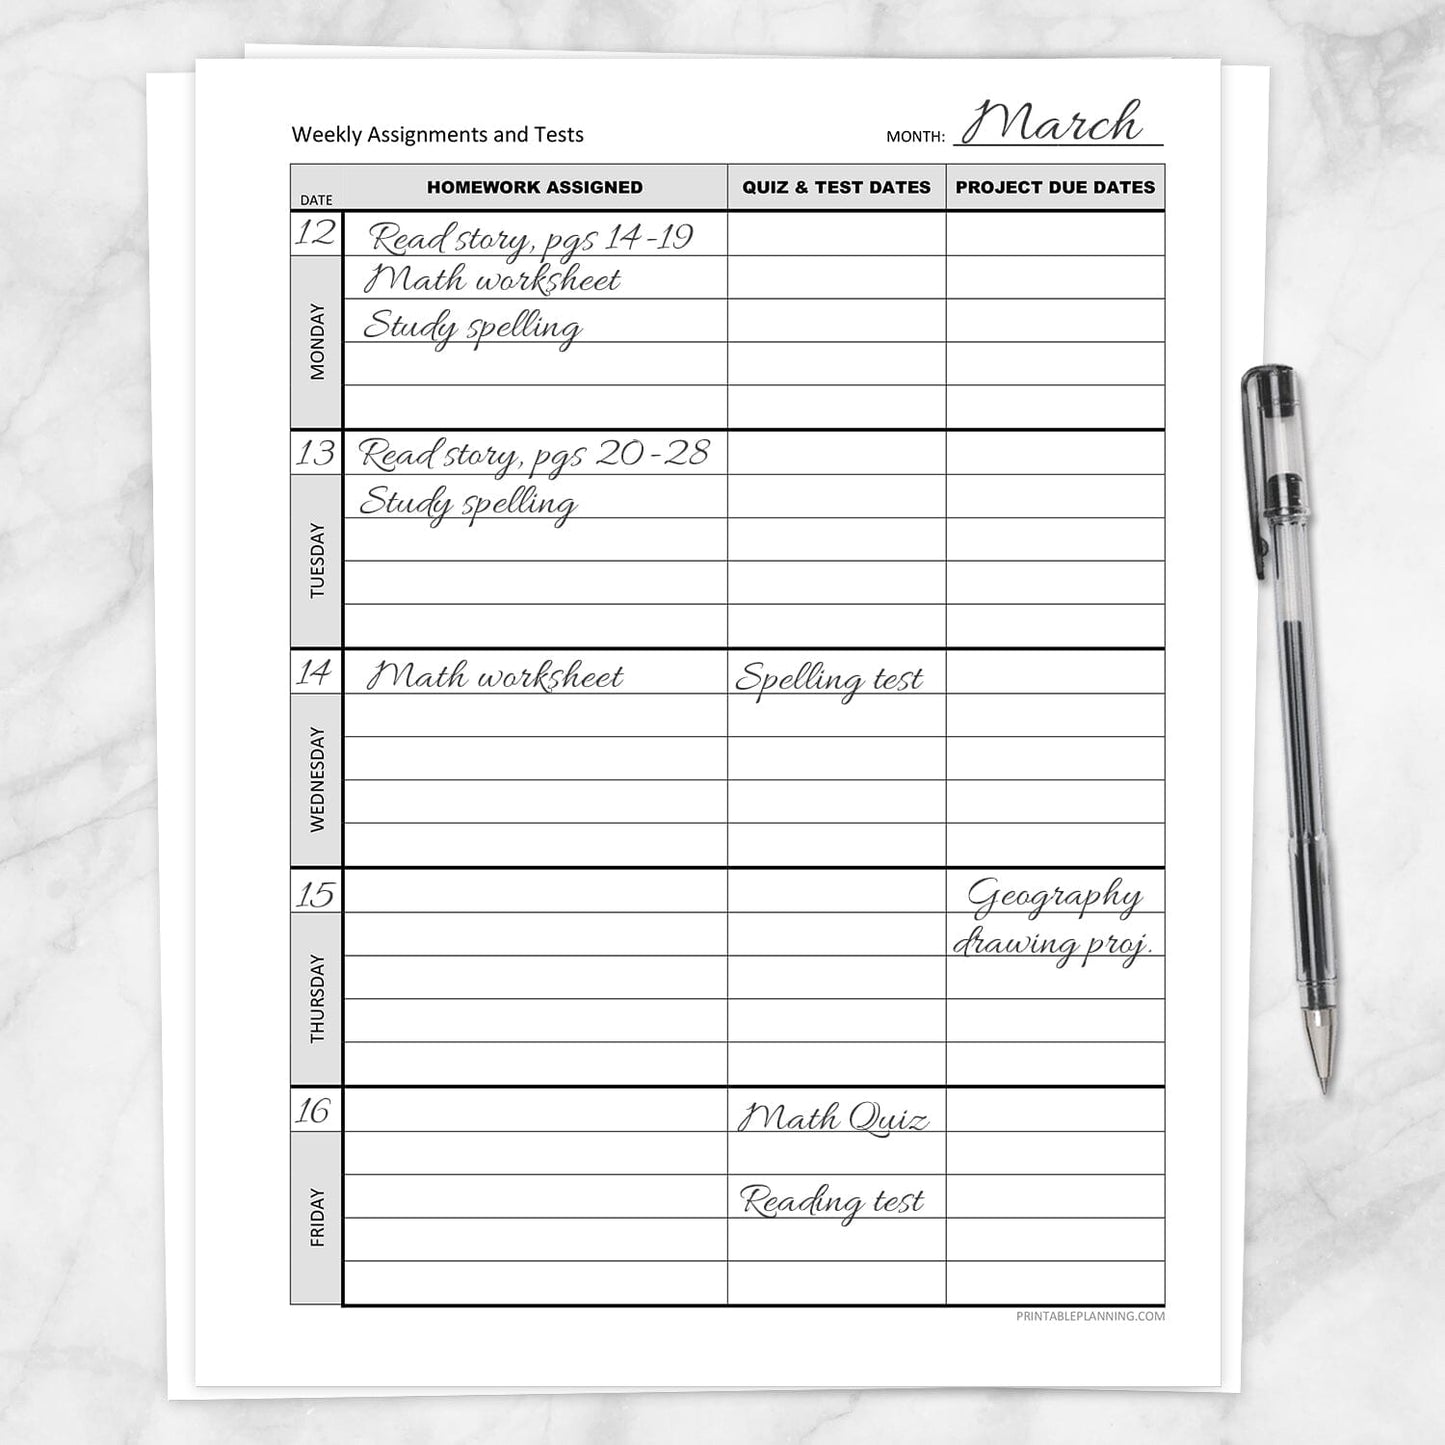 Printable Weekly School Assignments and Tests Sheet (front side filled in) at Printable Planning